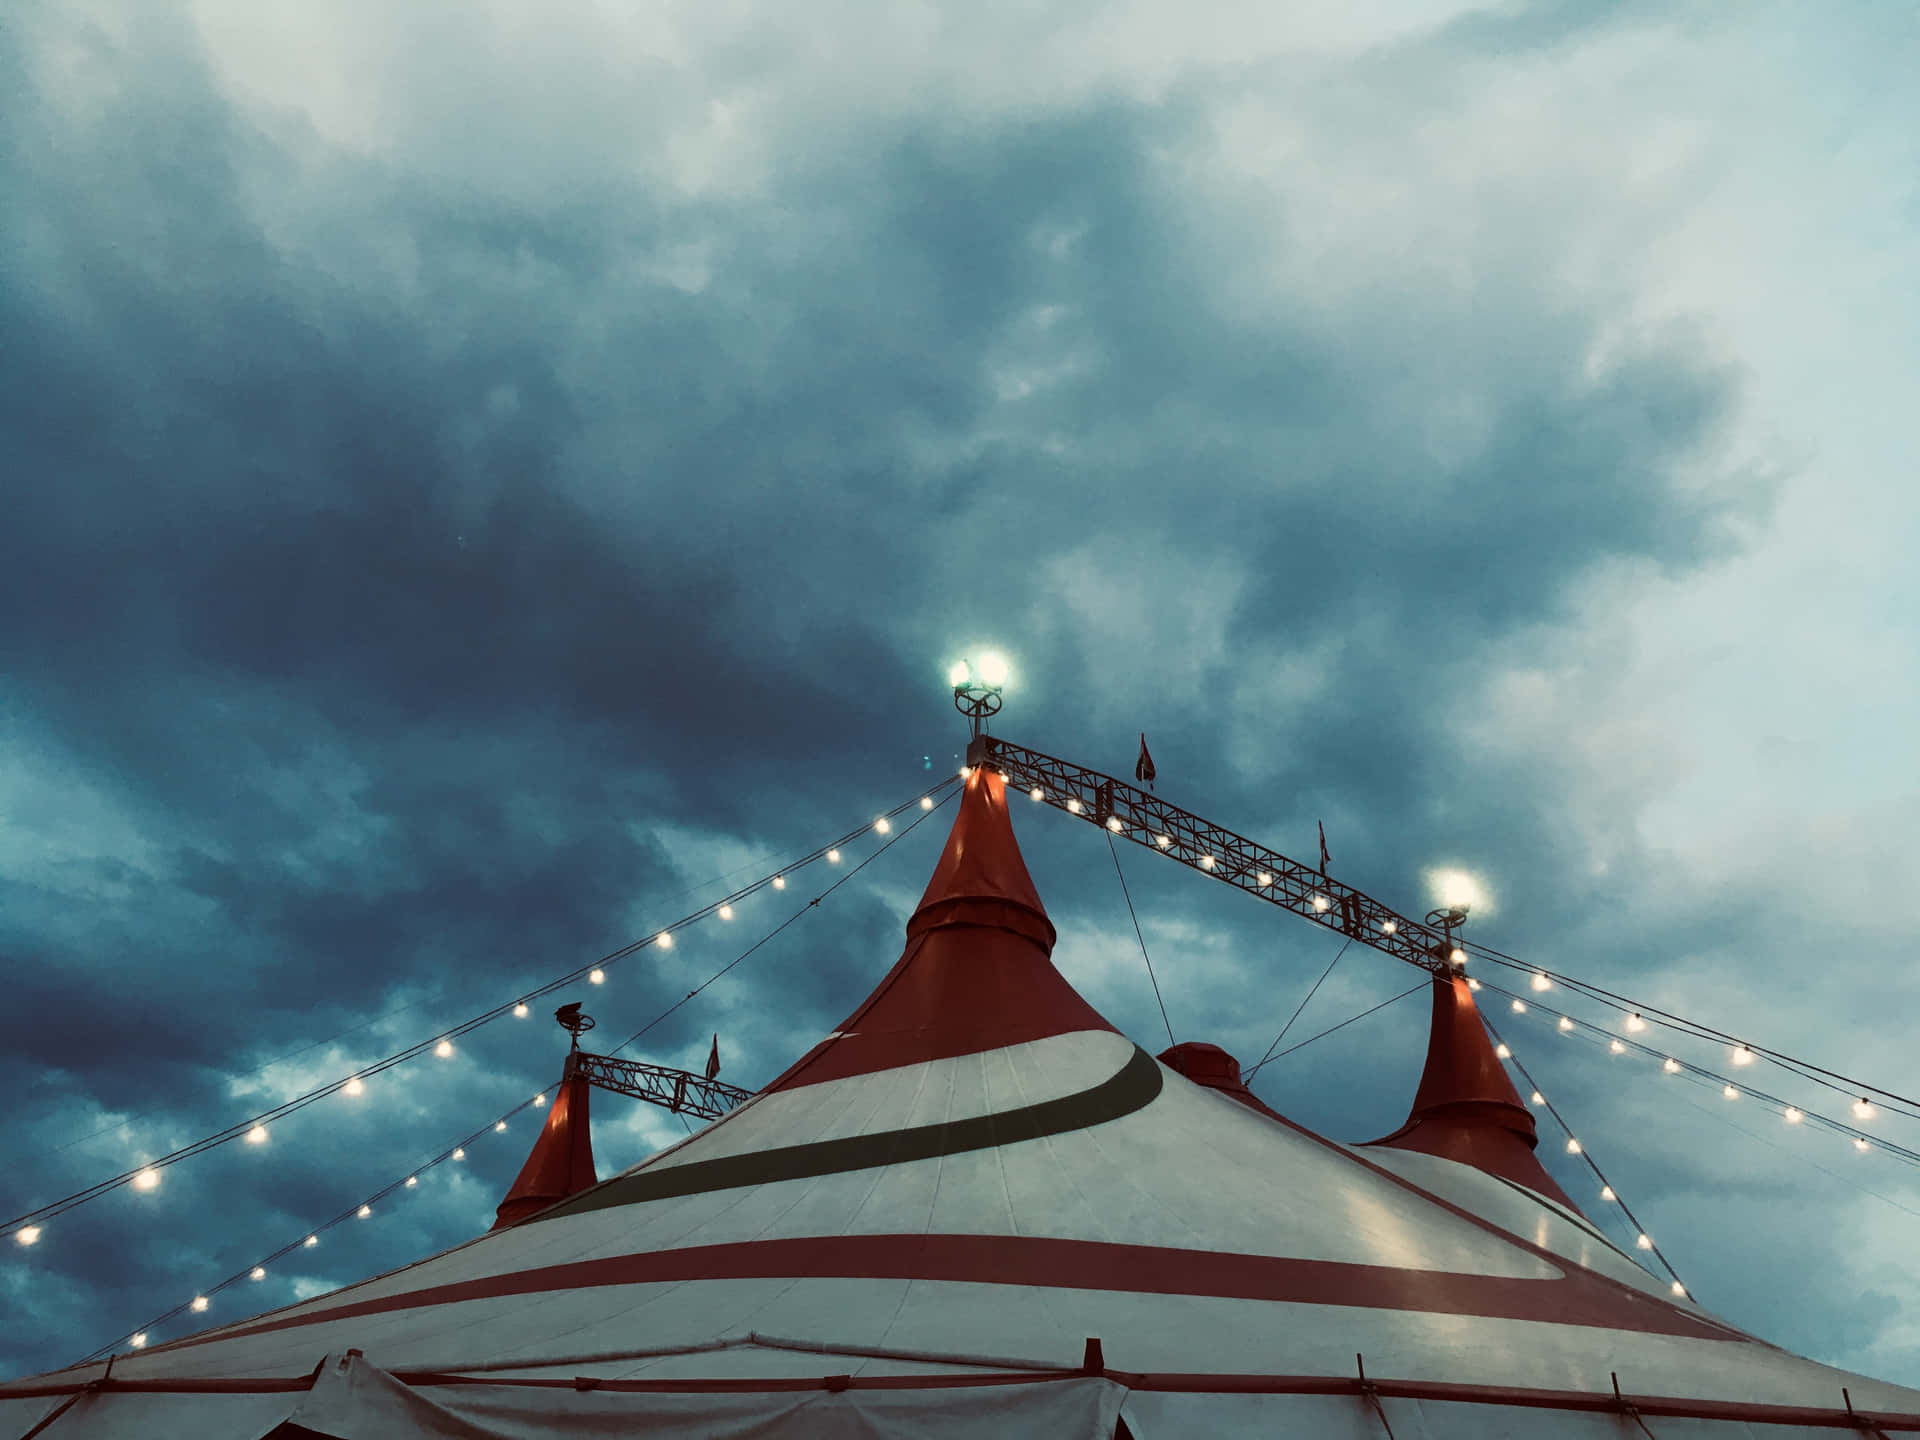 Witness the Magic of the Circus